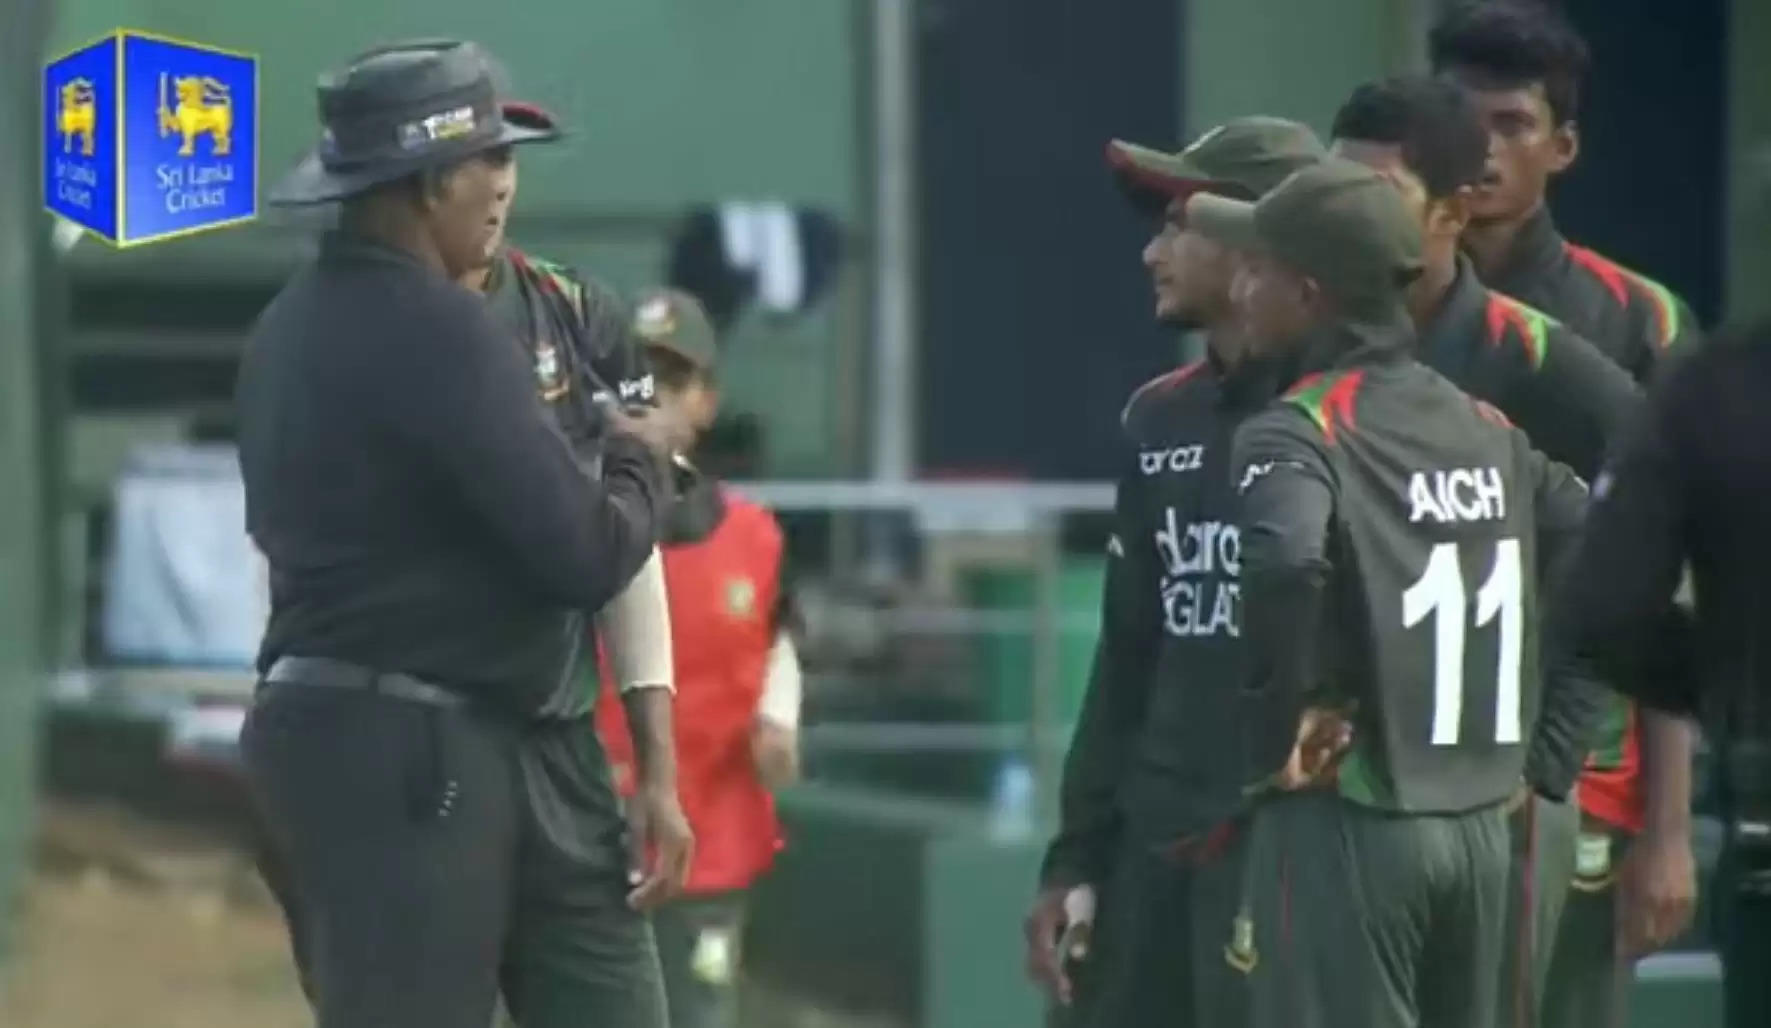 Bangladesh U19 players surround umpire after he disallows to bowl a player for taking a long break